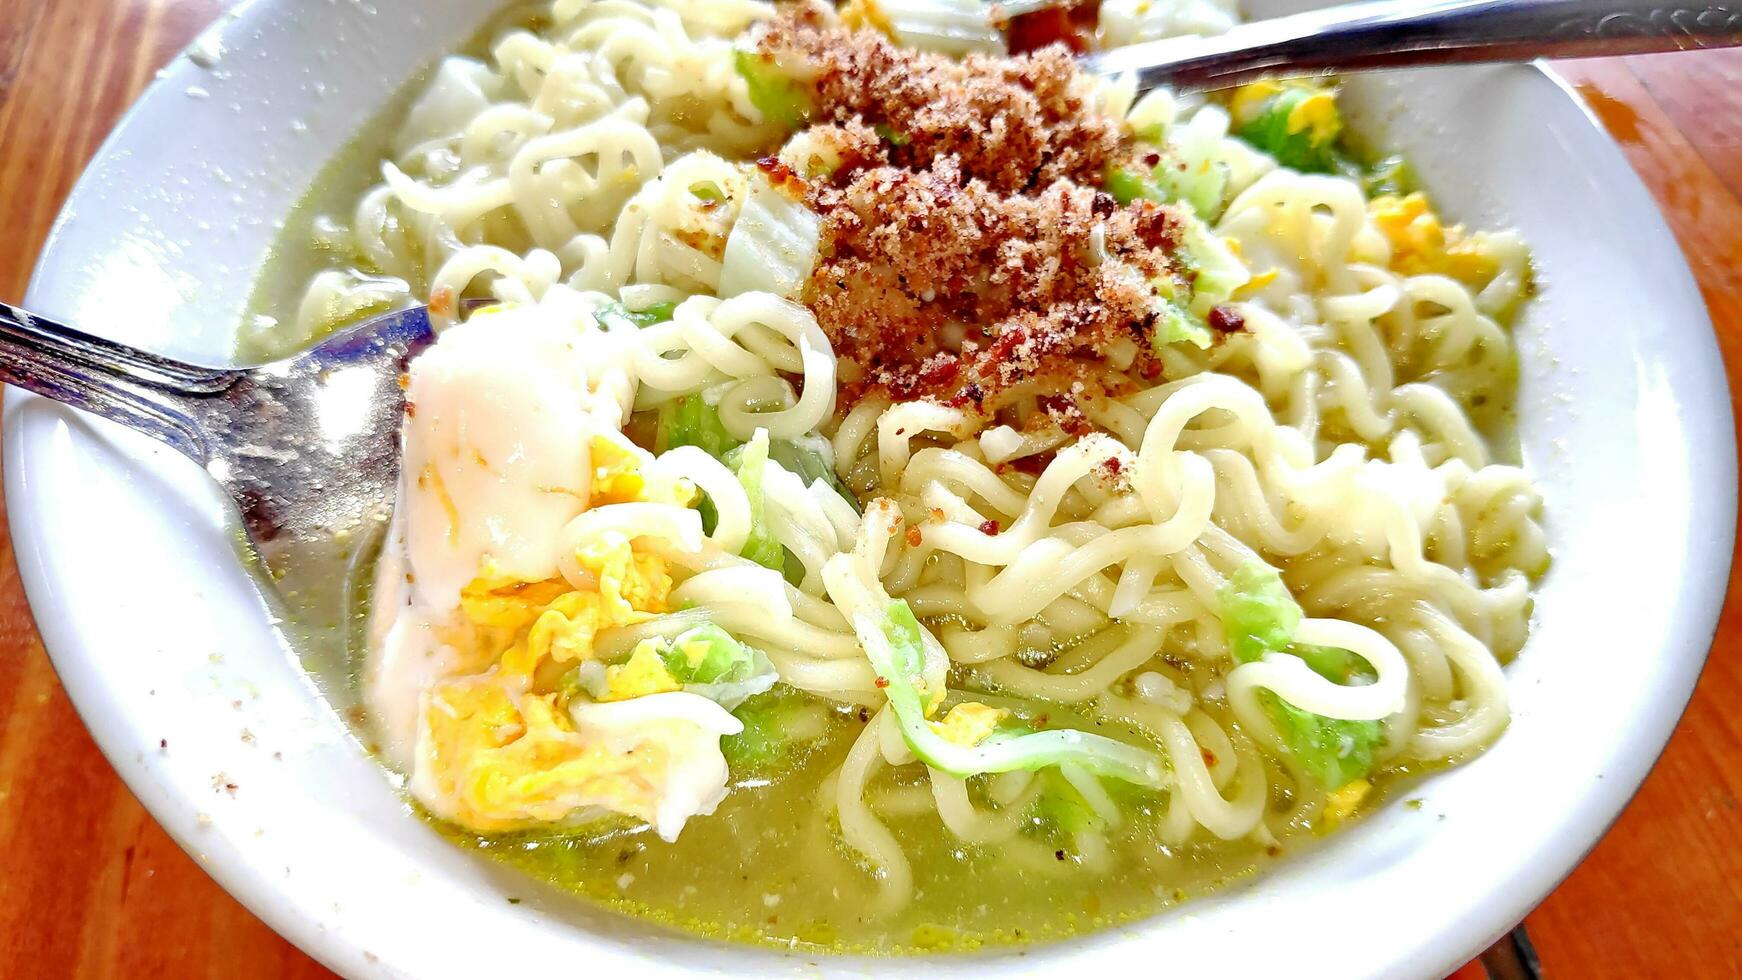 indonesian favourite instant noodle, soto flavour ready to eat photo